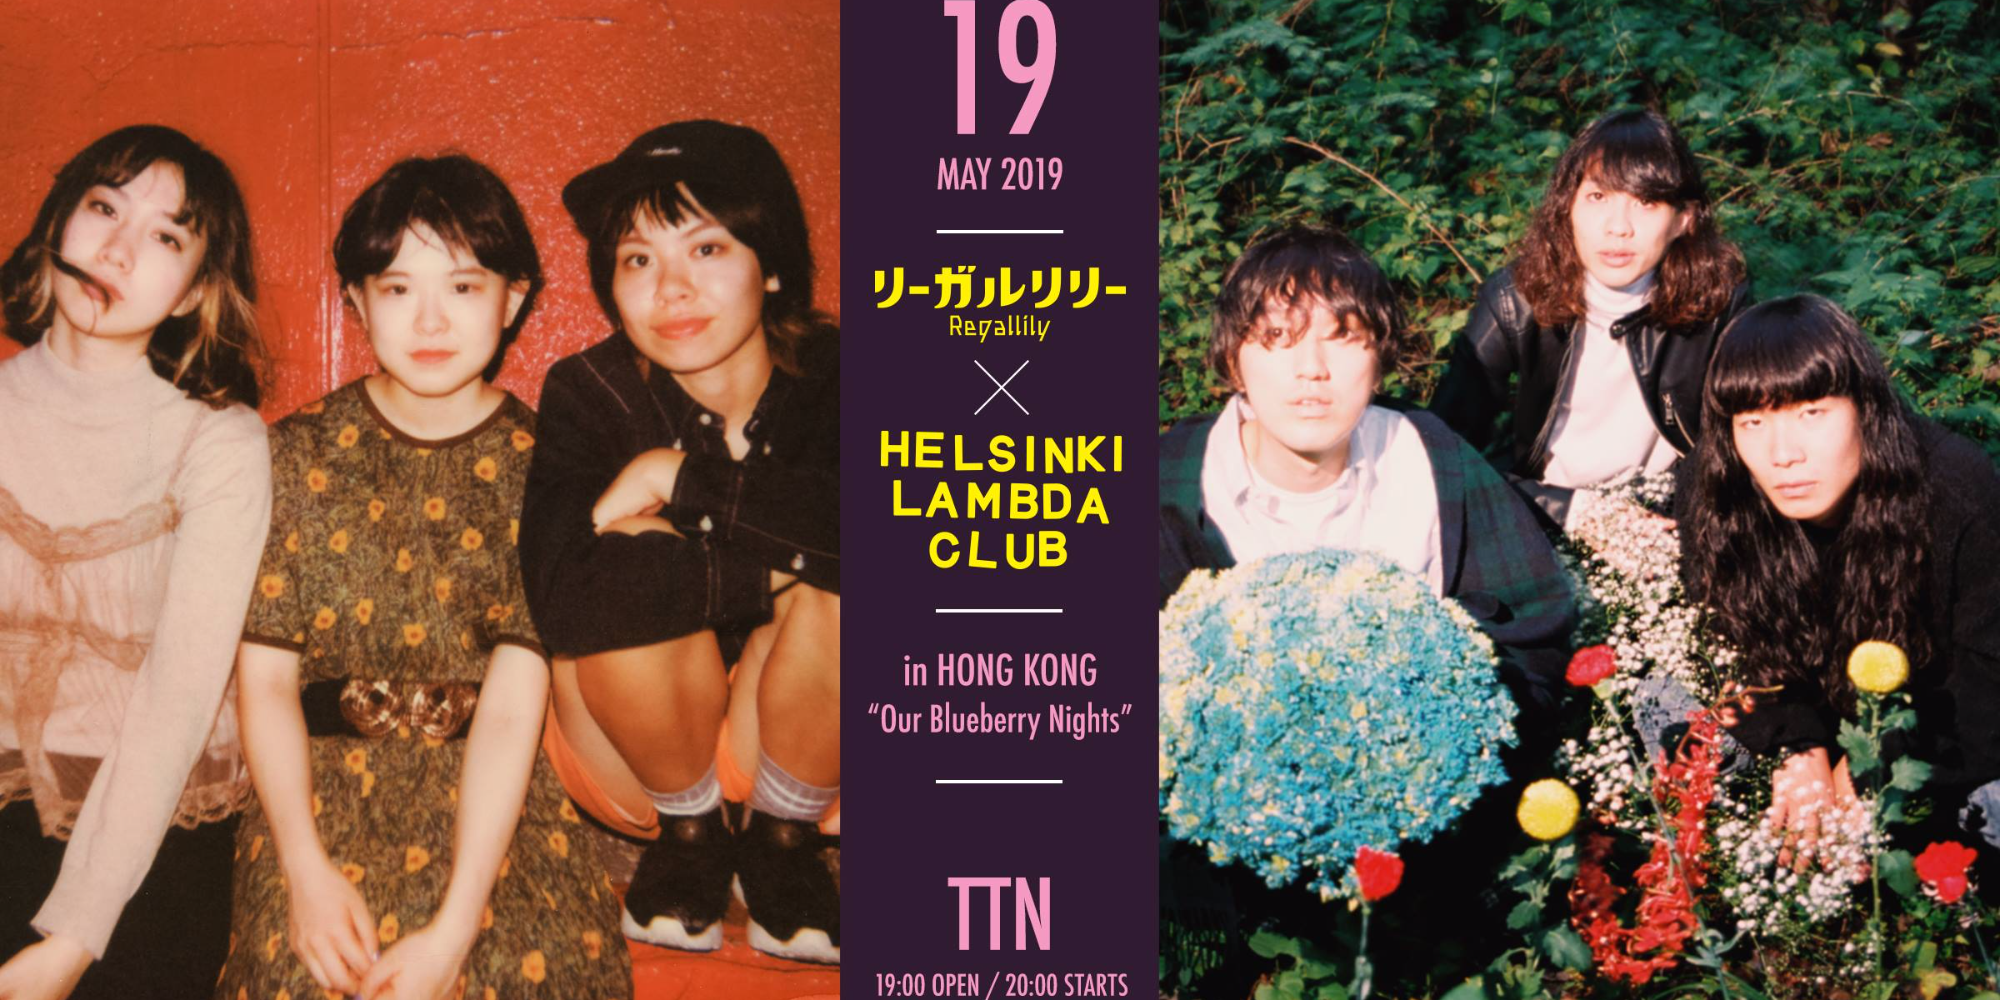 Regallily × Helsinki Lambda Club in Hong Kong「Our Blueberry Nights」